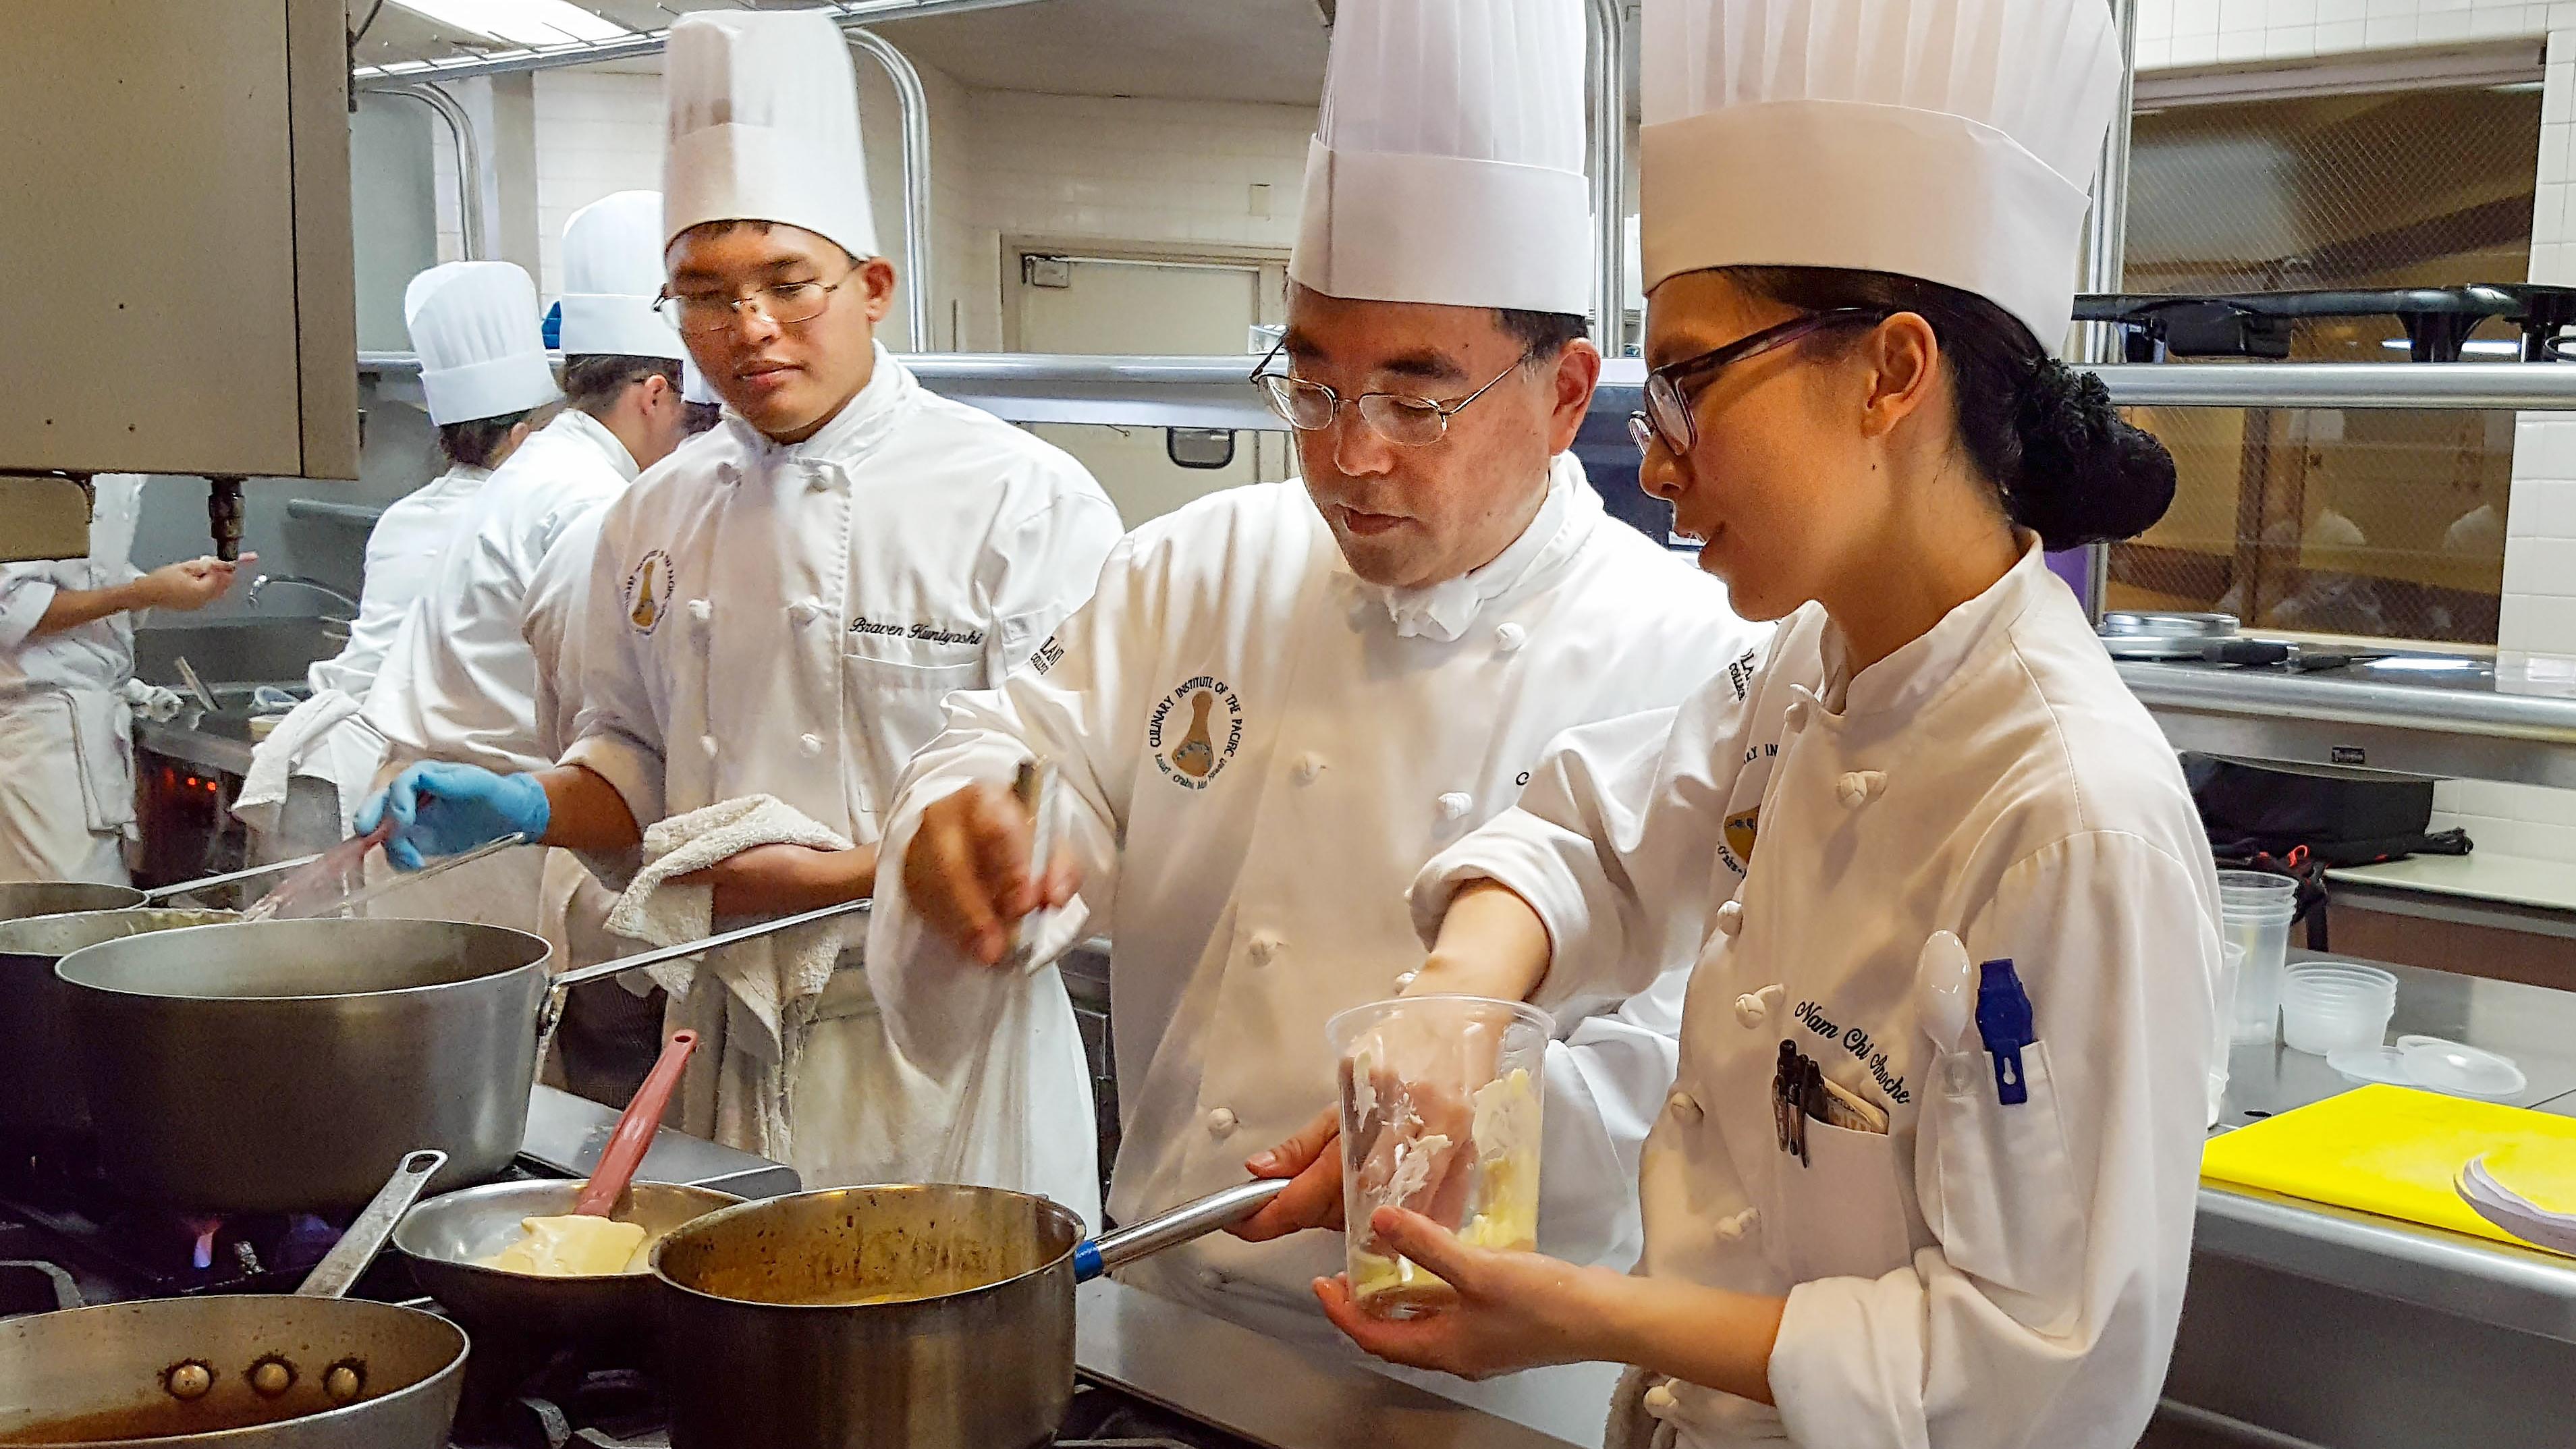 The Culinary Institute of the Pacific at KCC has openings in their FREE Hospitality Apprenticeship Training Programs!